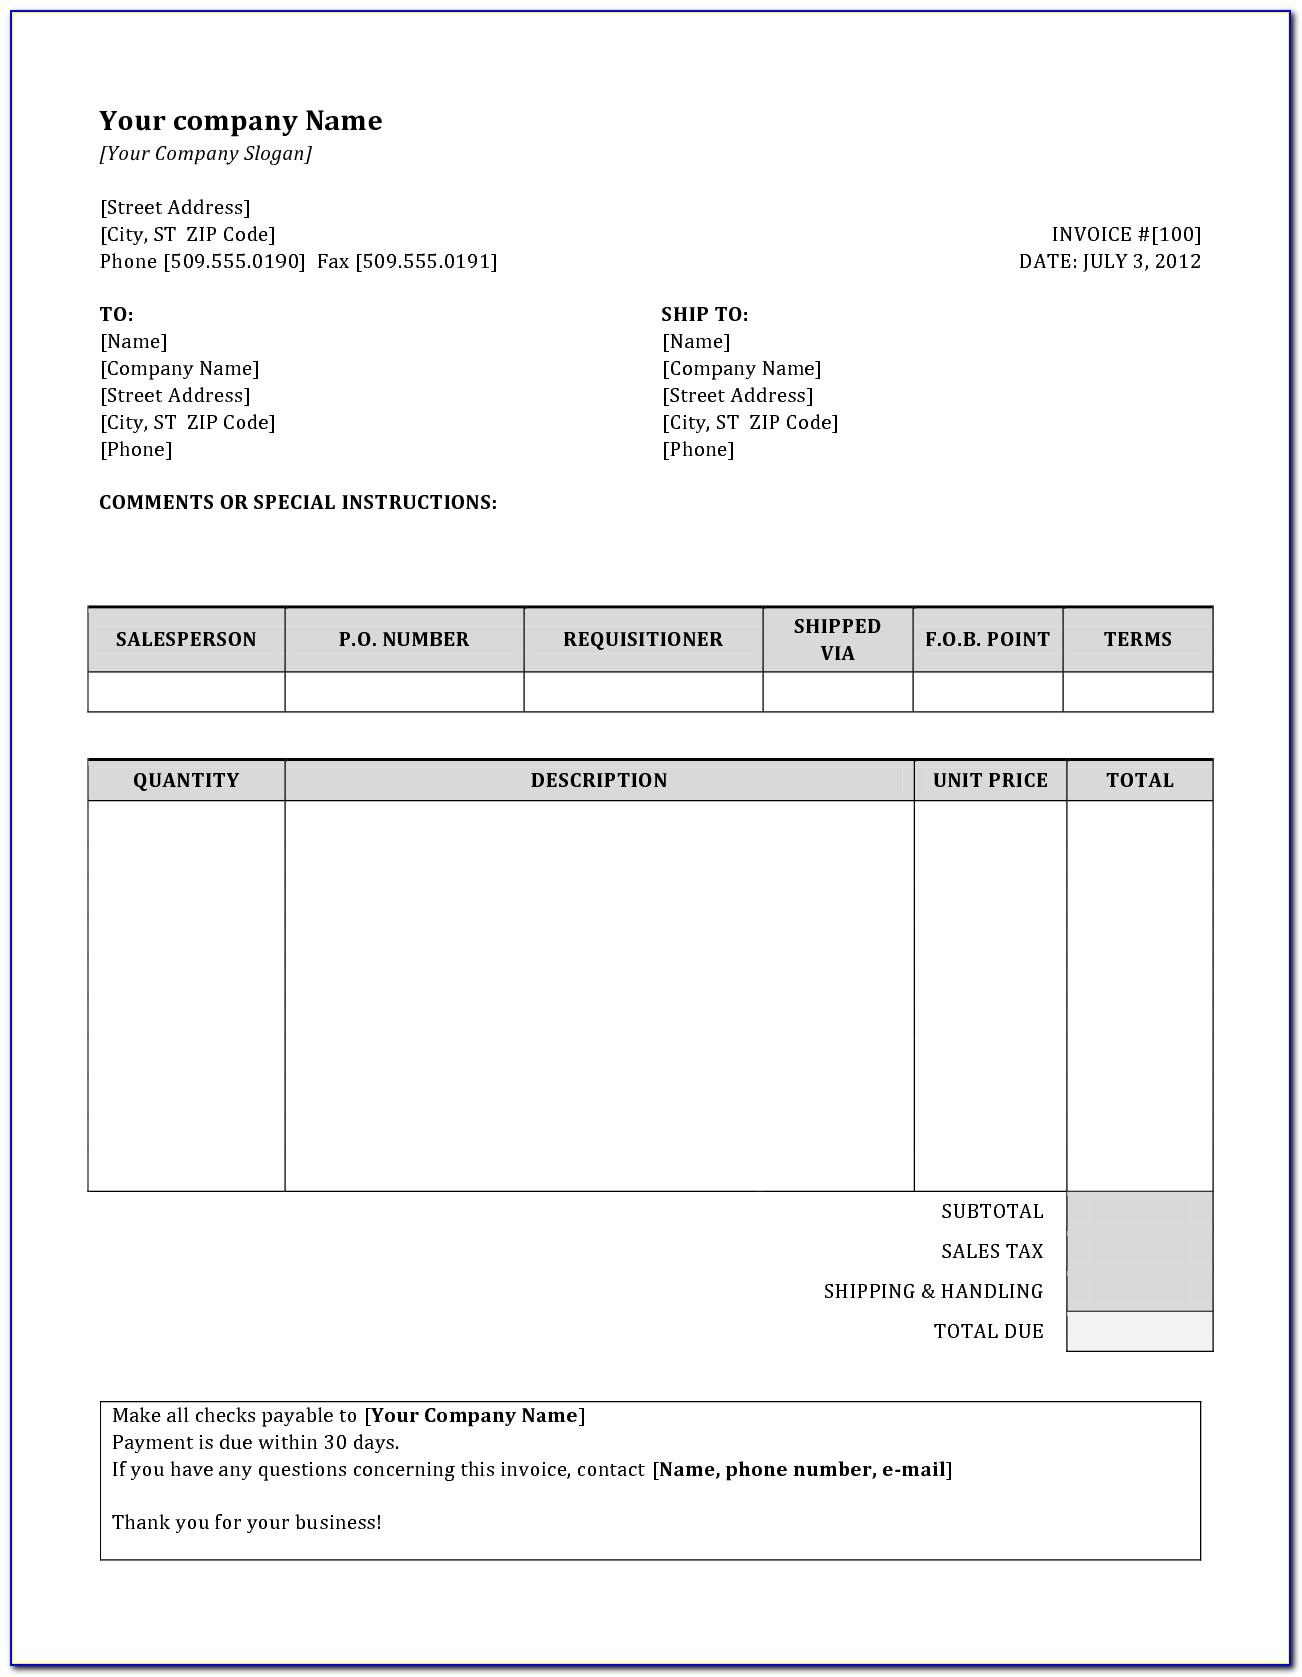 Simple Invoice Template Docx